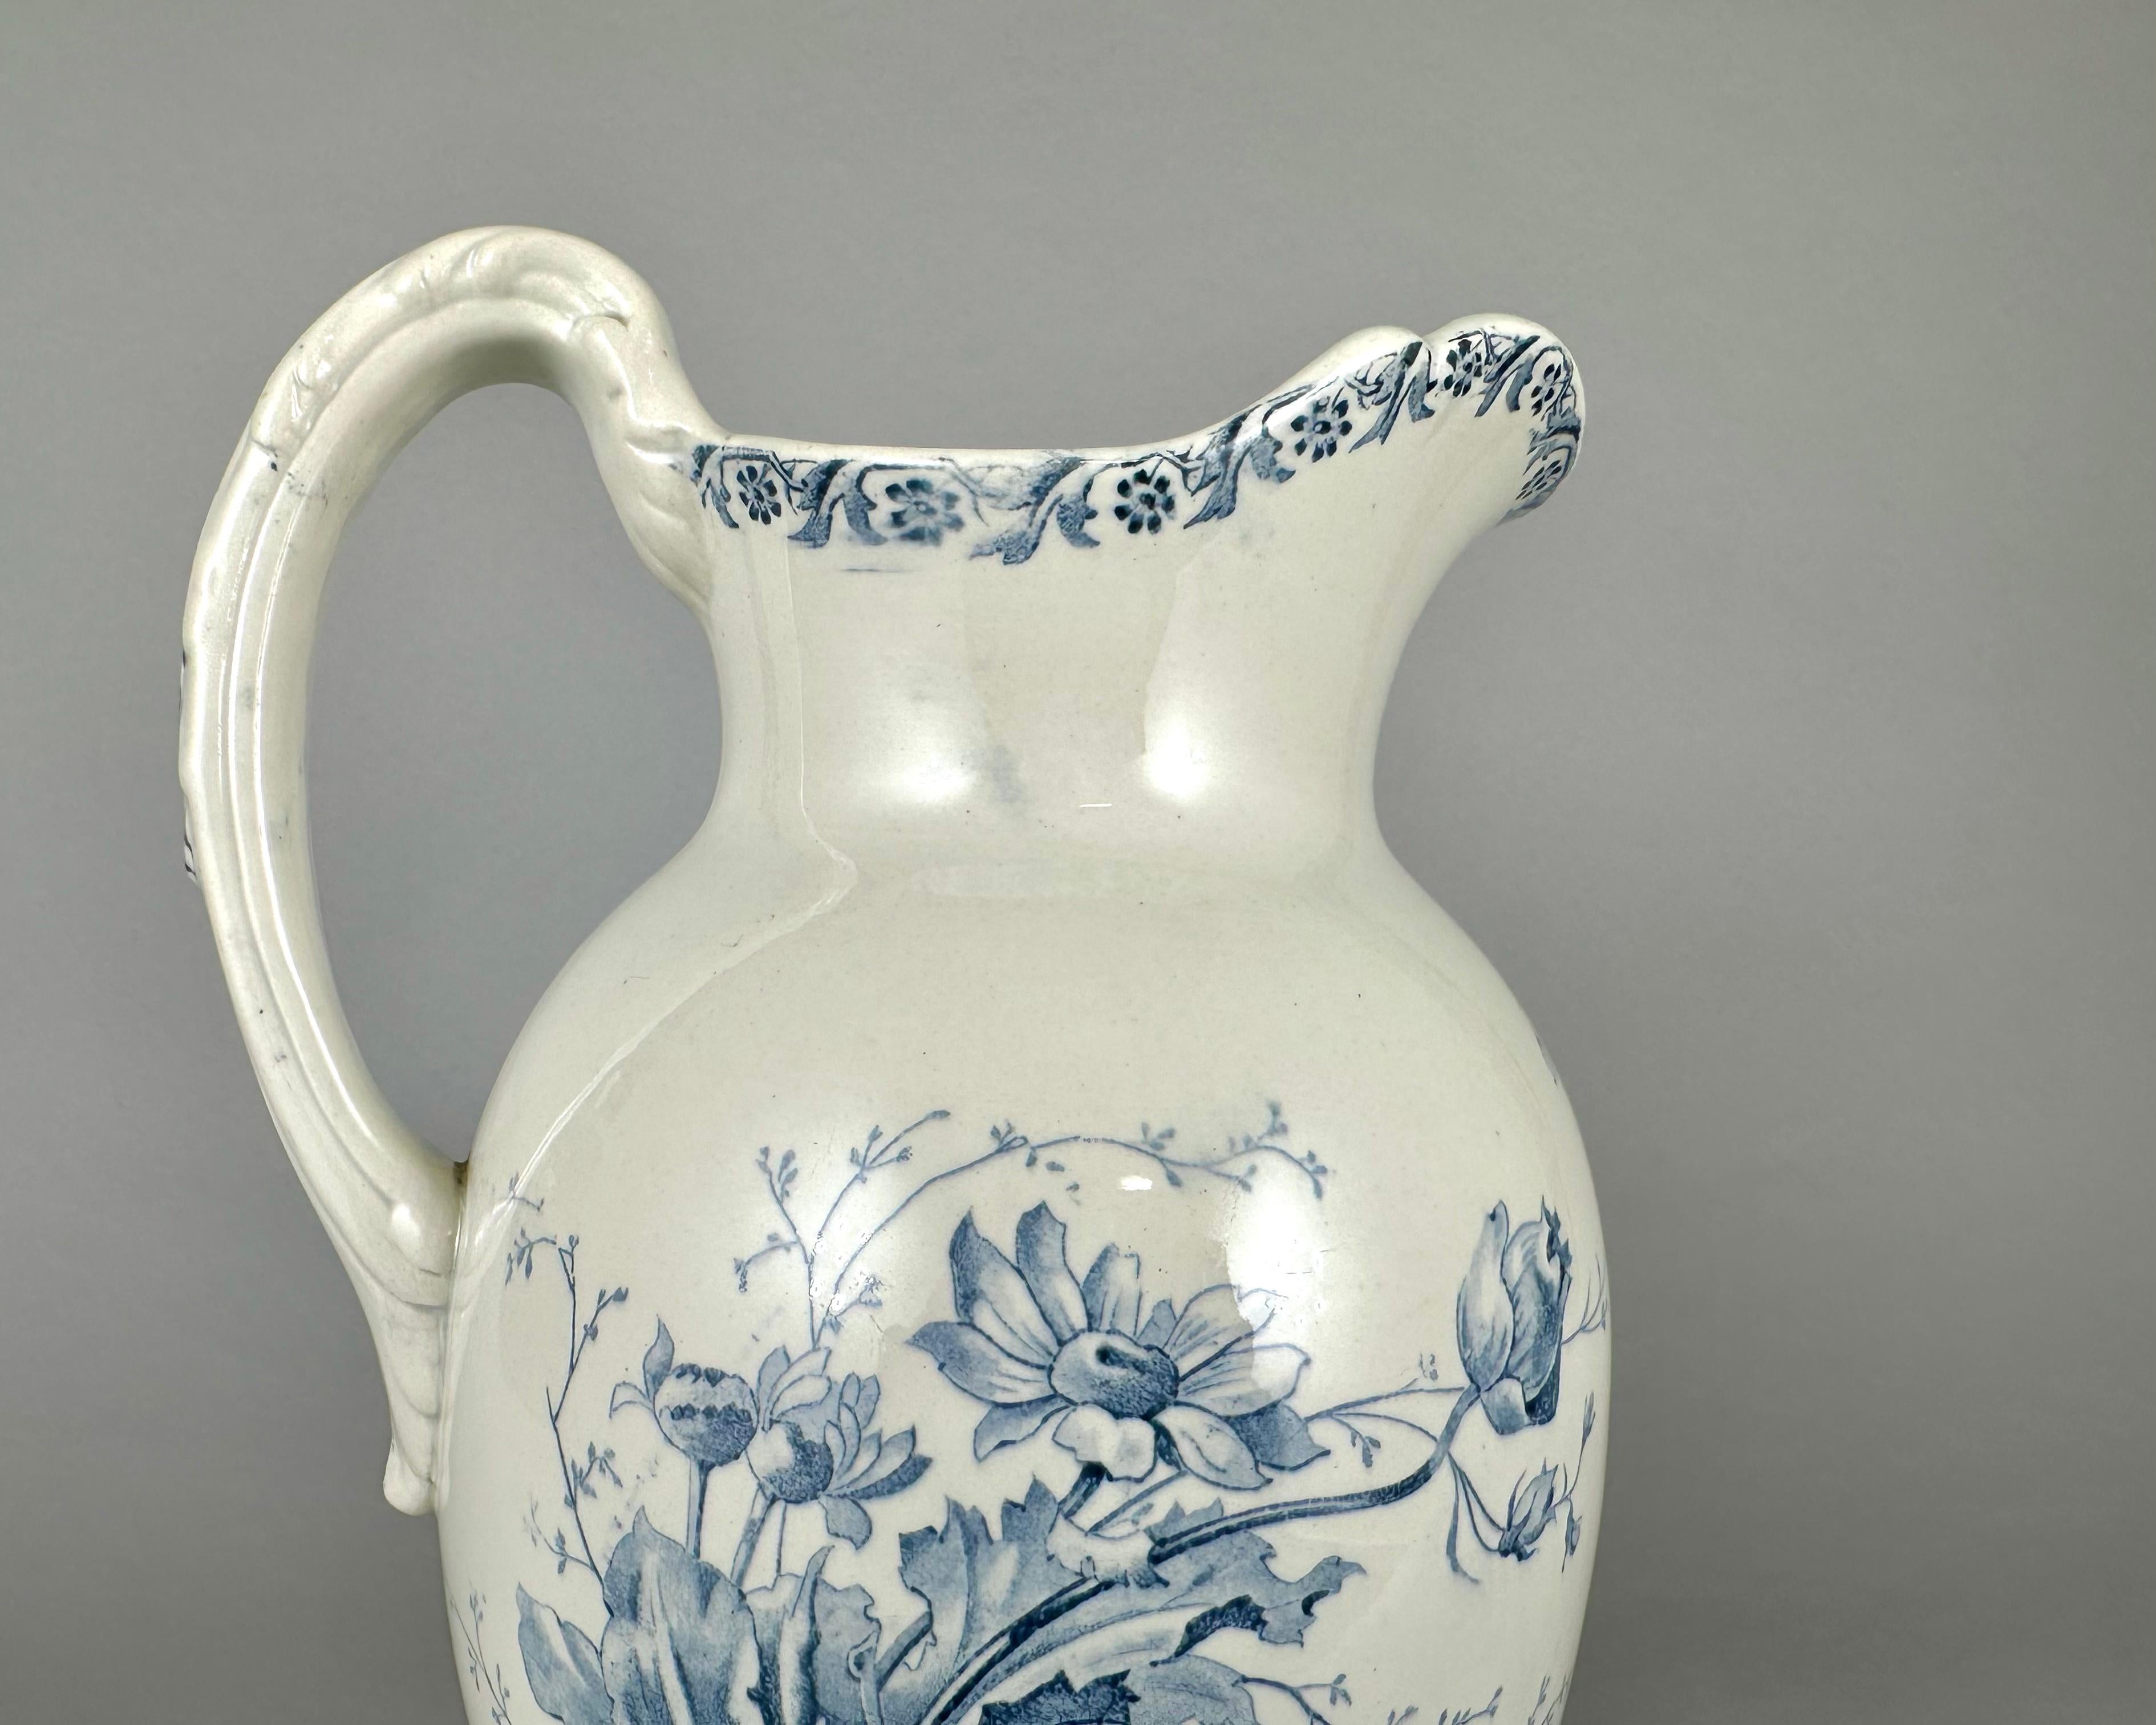 French Pitcher Antique In Ceramic Xenia Floral Decor Jug France Early 20th Century